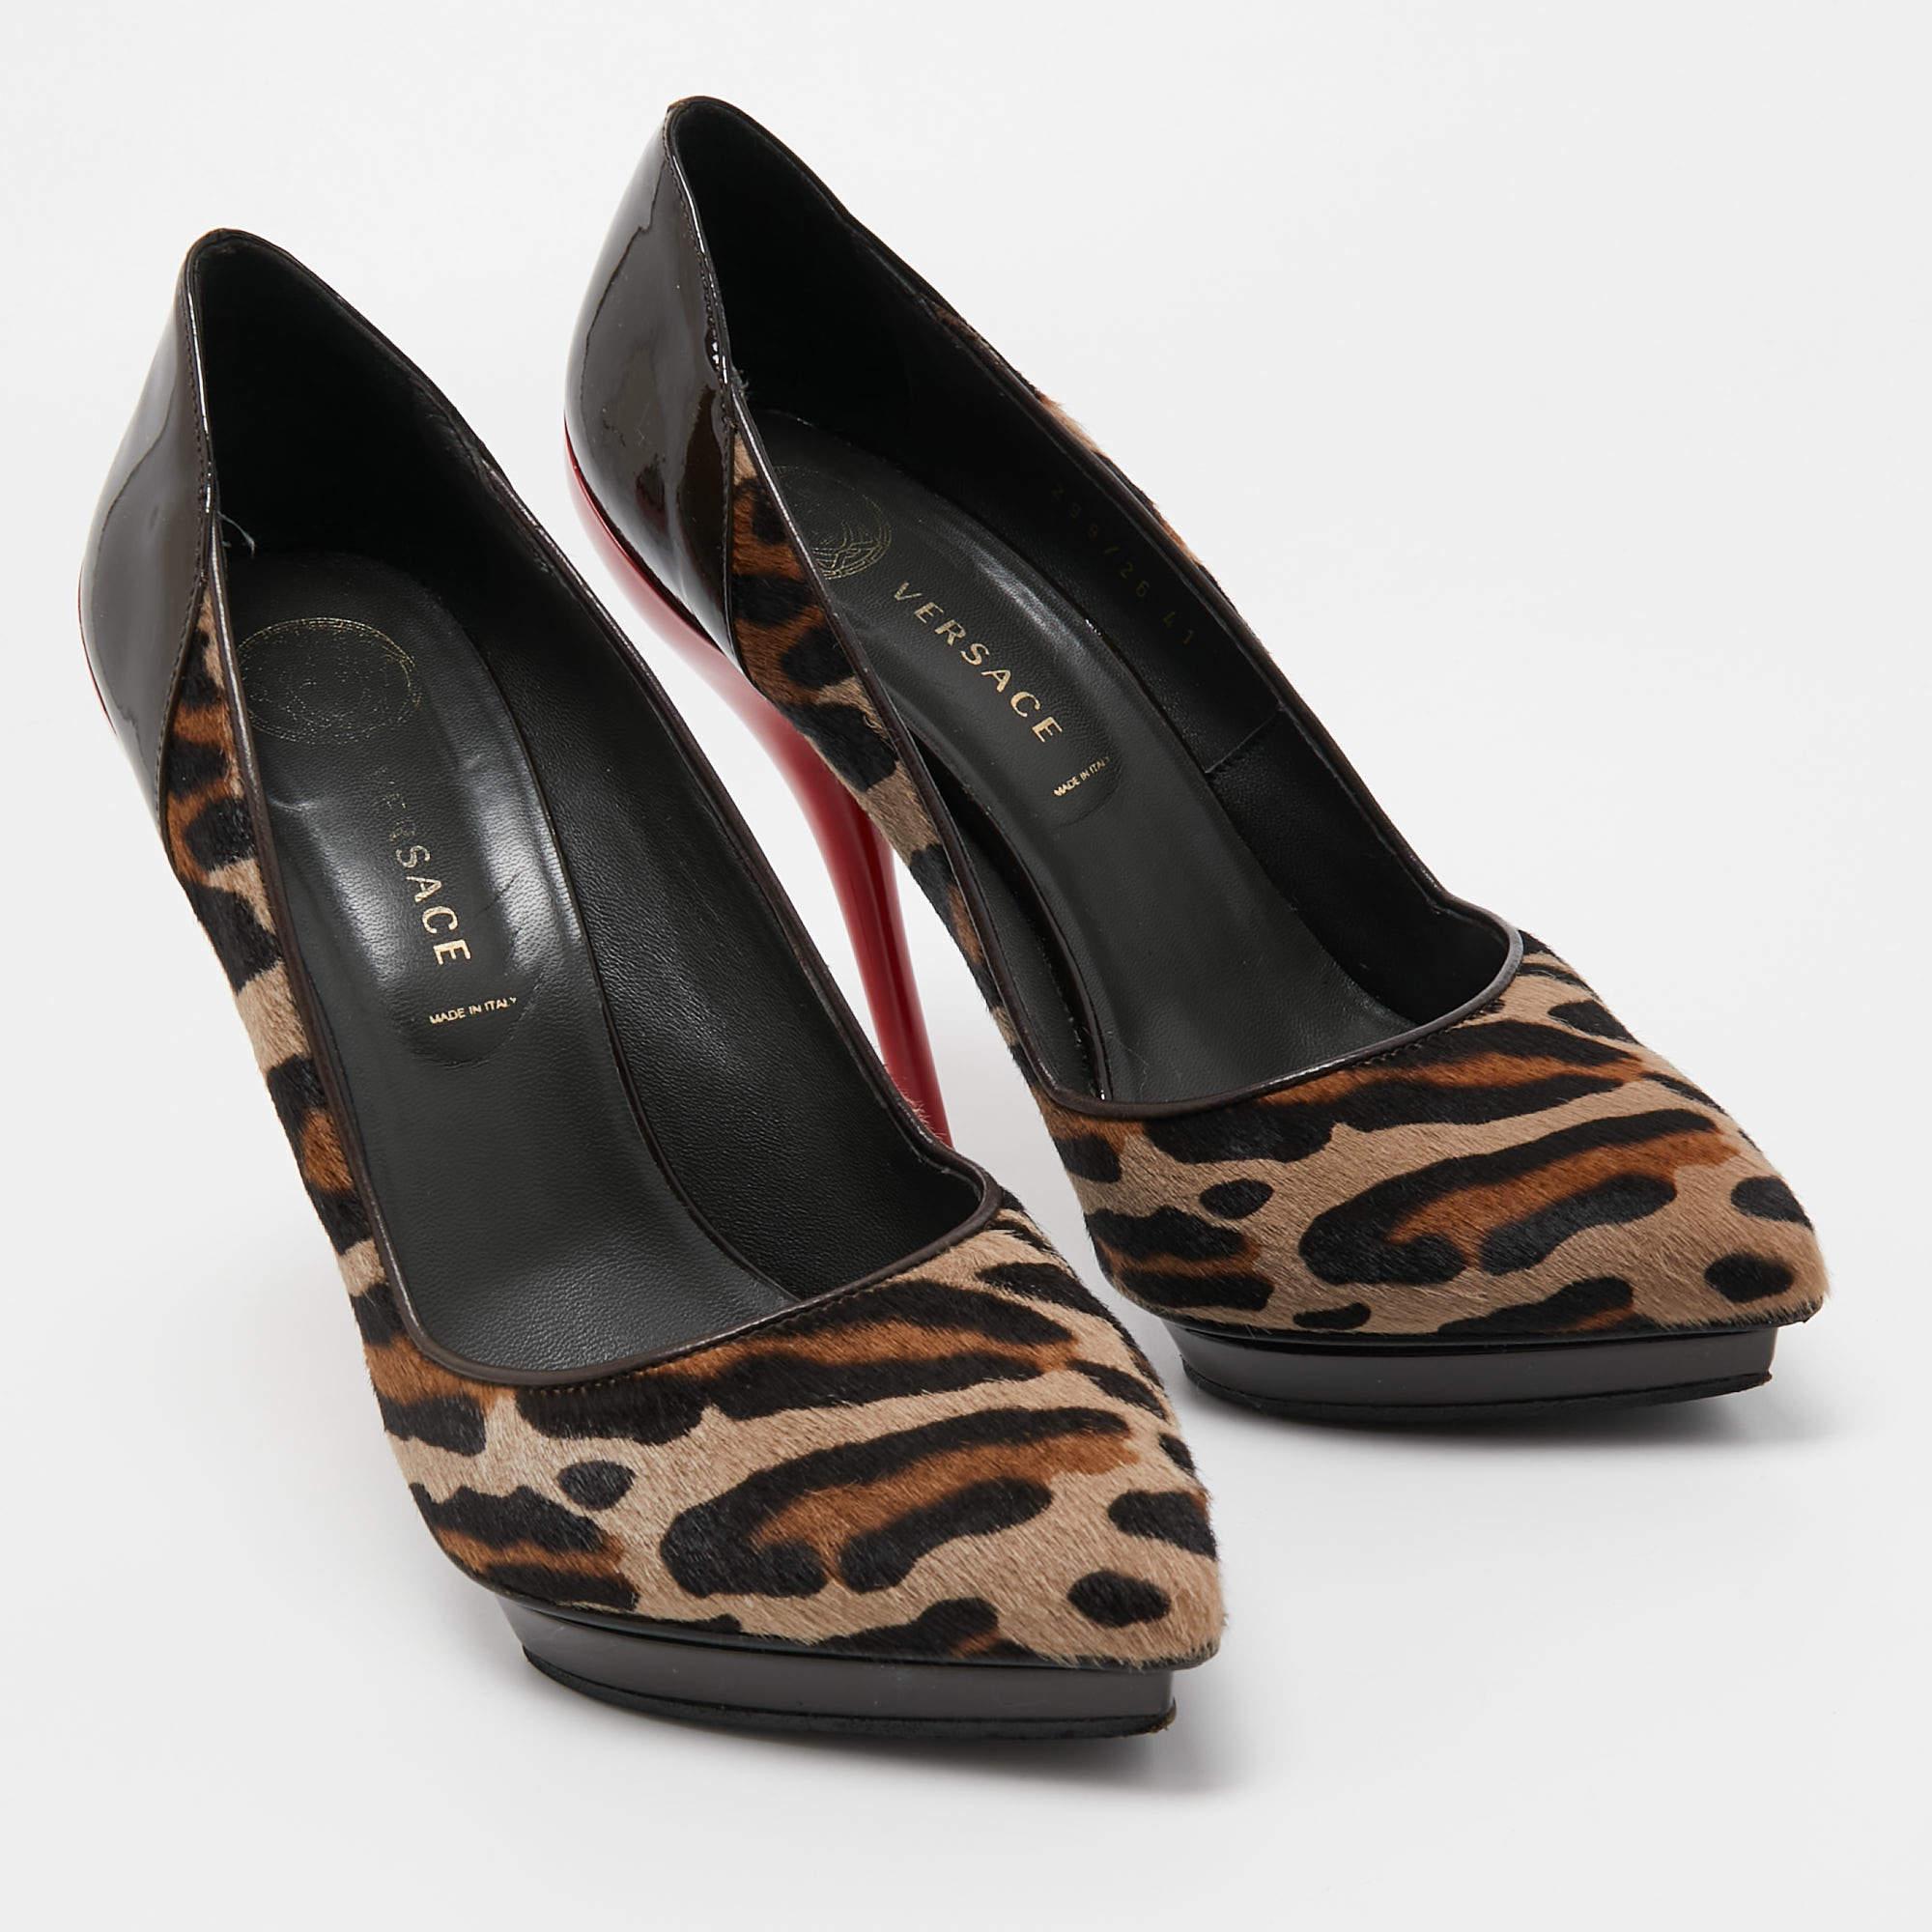 The fashion house’s tradition of excellence, coupled with modern design sensibilities, works to make these Versace pumps a fabulous choice. They'll help you deliver a chic look with ease.

